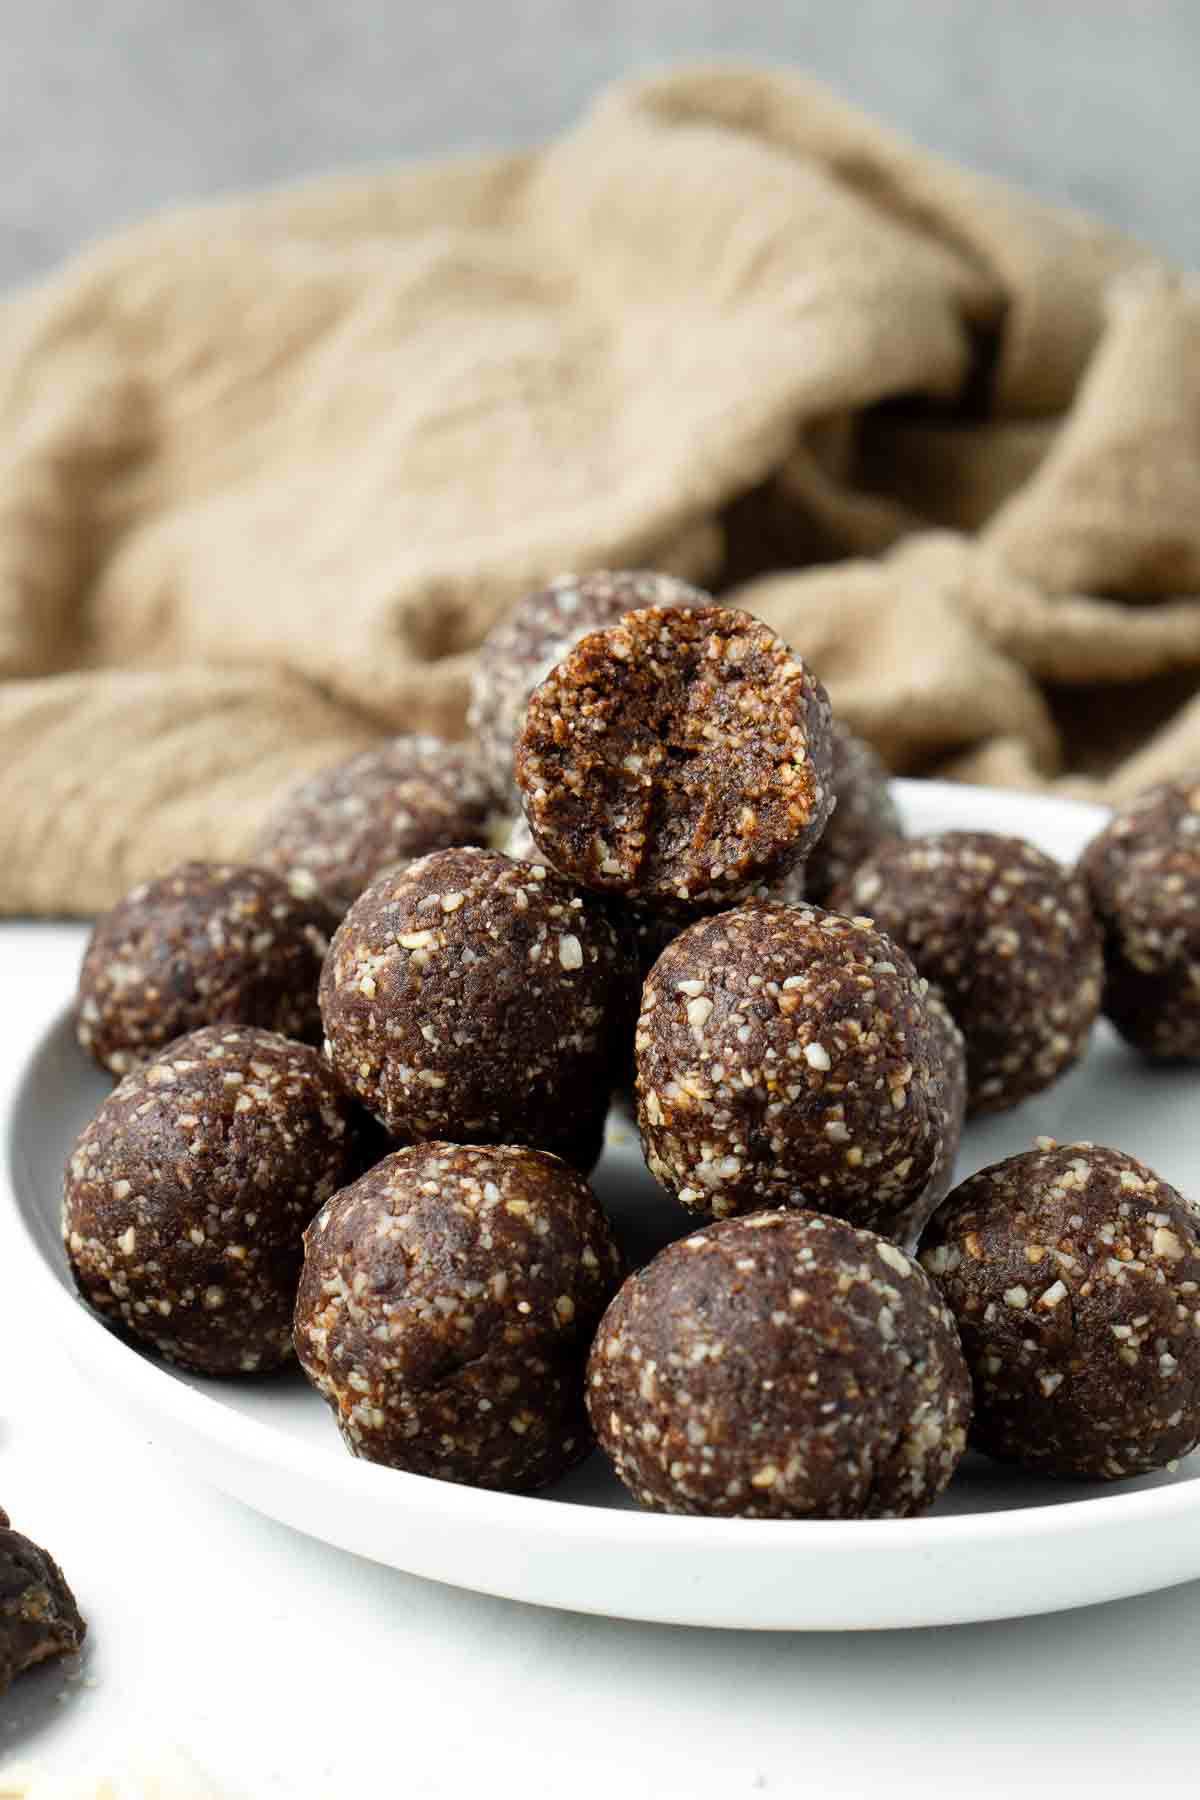 Chocolate Hazelnut Bliss Balls in a pile on a plate with one having a bite taken out.